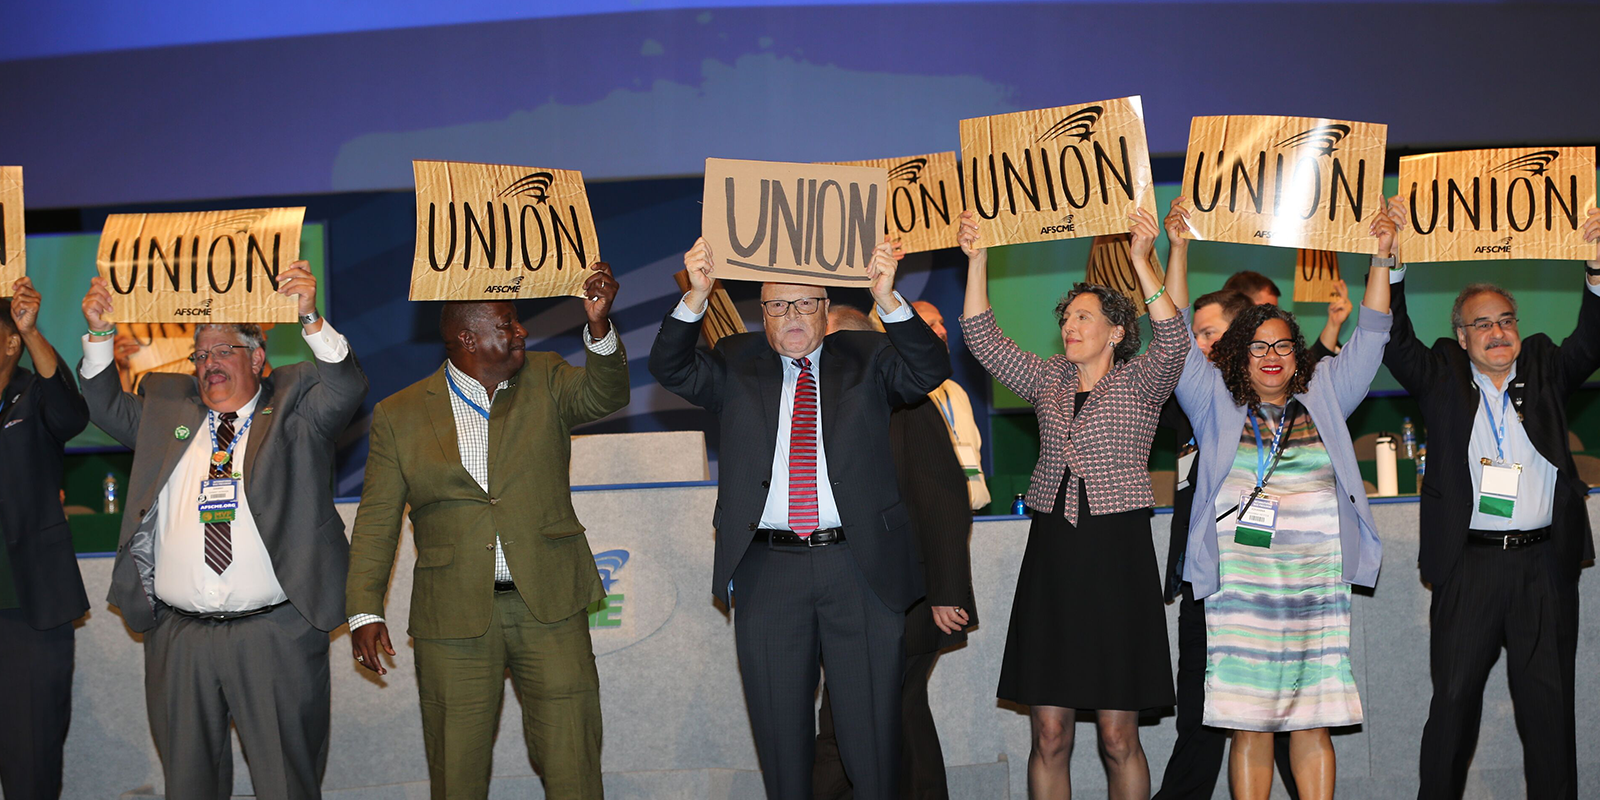 Approval for Unions Near 50-Year High, Reflecting Broader Momentum